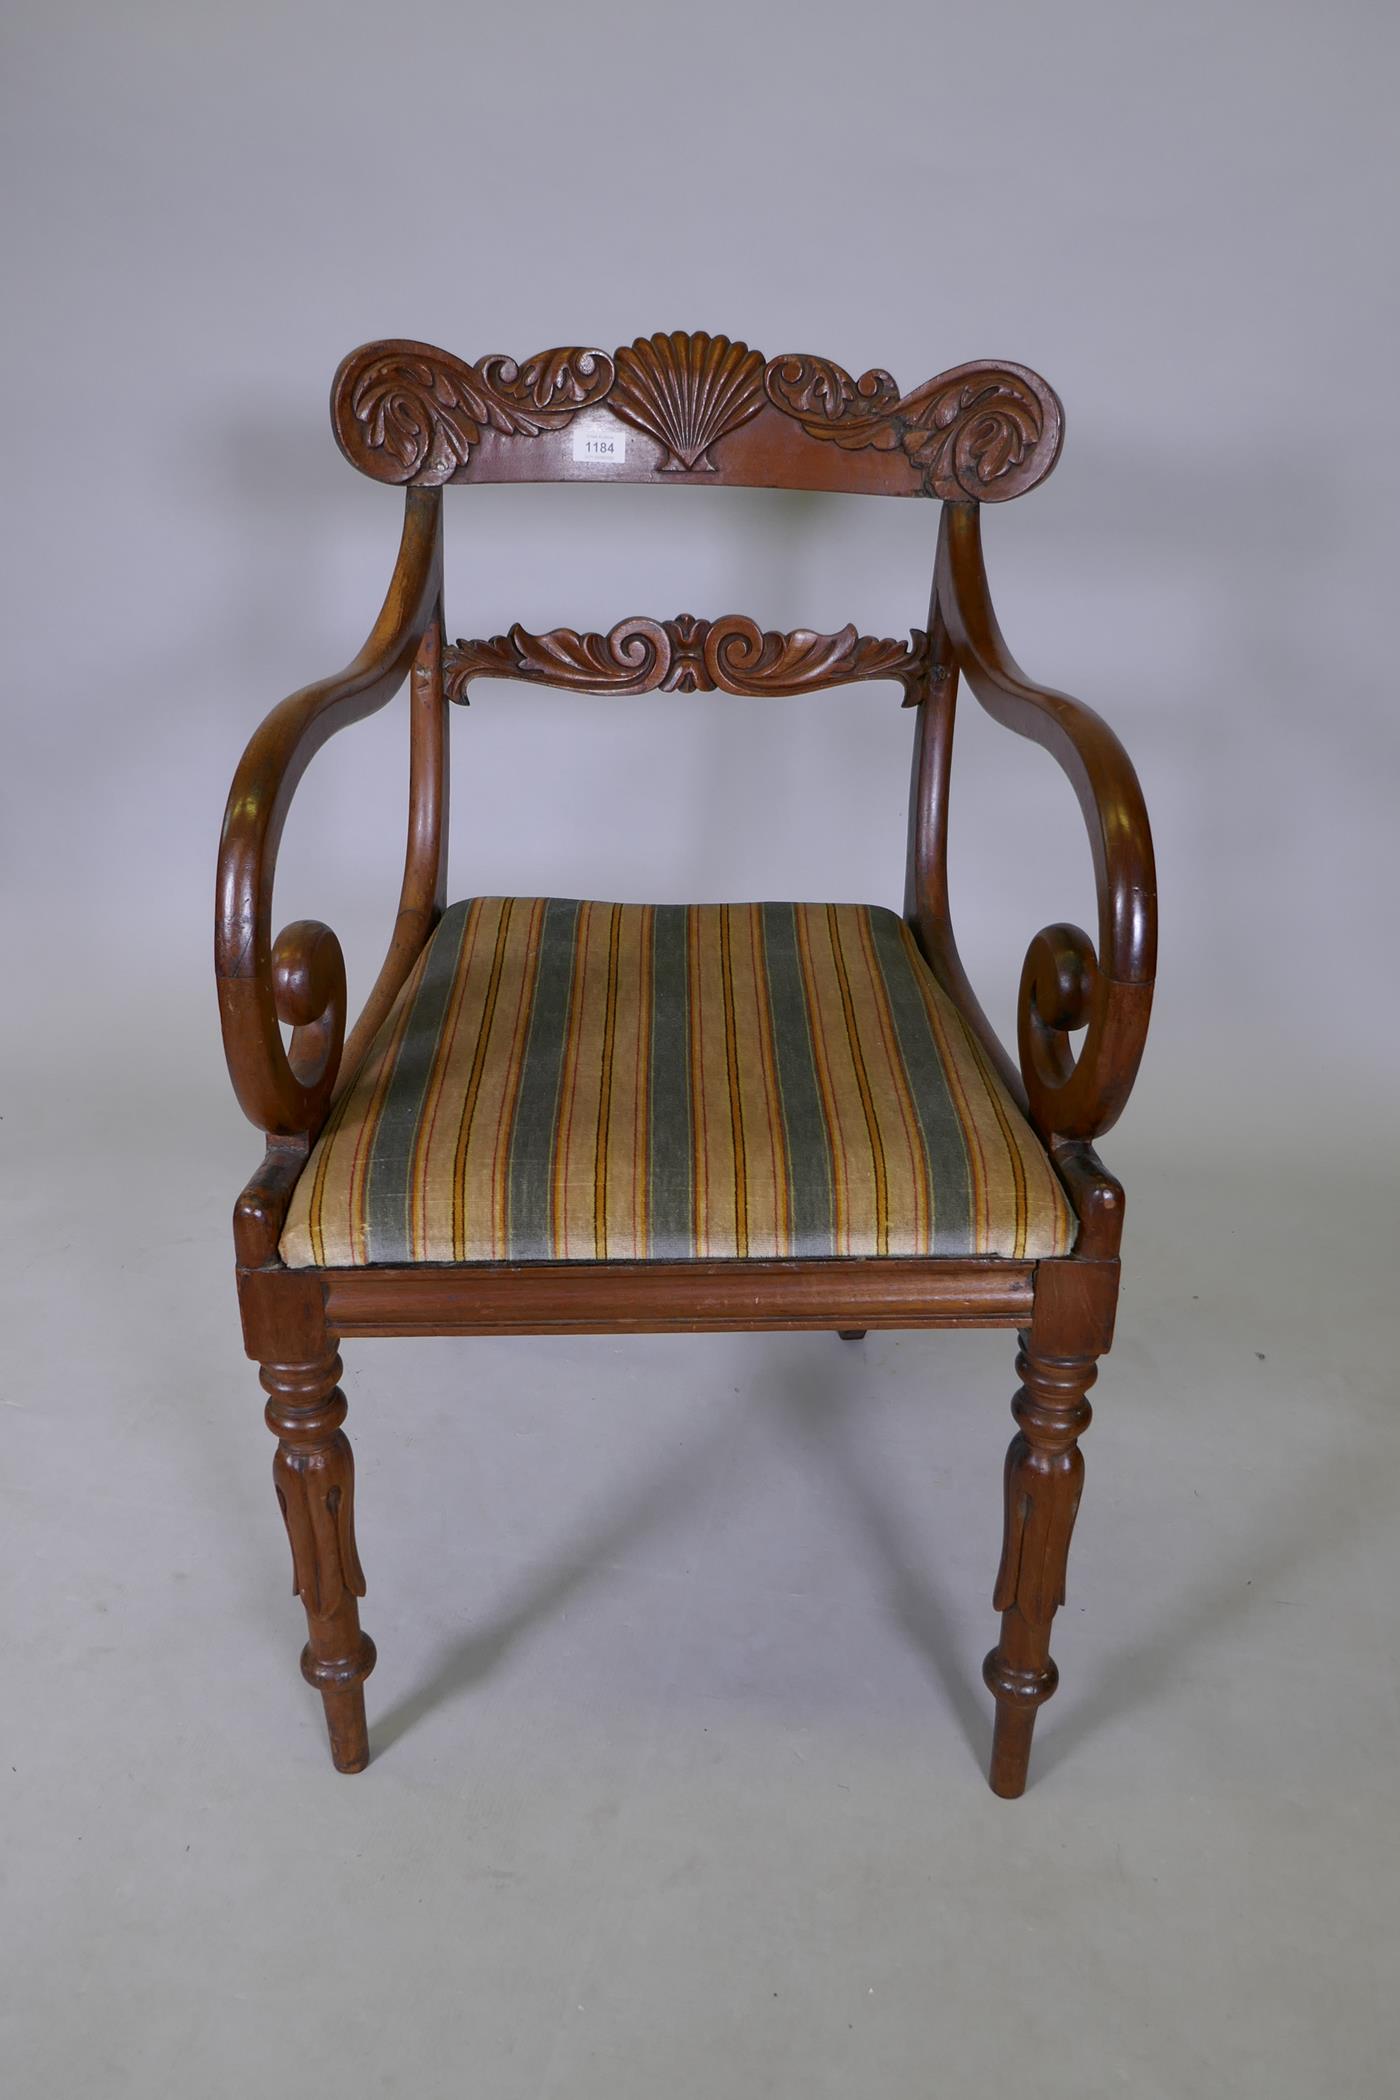 A Georgian style Anglo Indian mahogany carver chair with scroll arms and fluted turned supports - Image 5 of 5